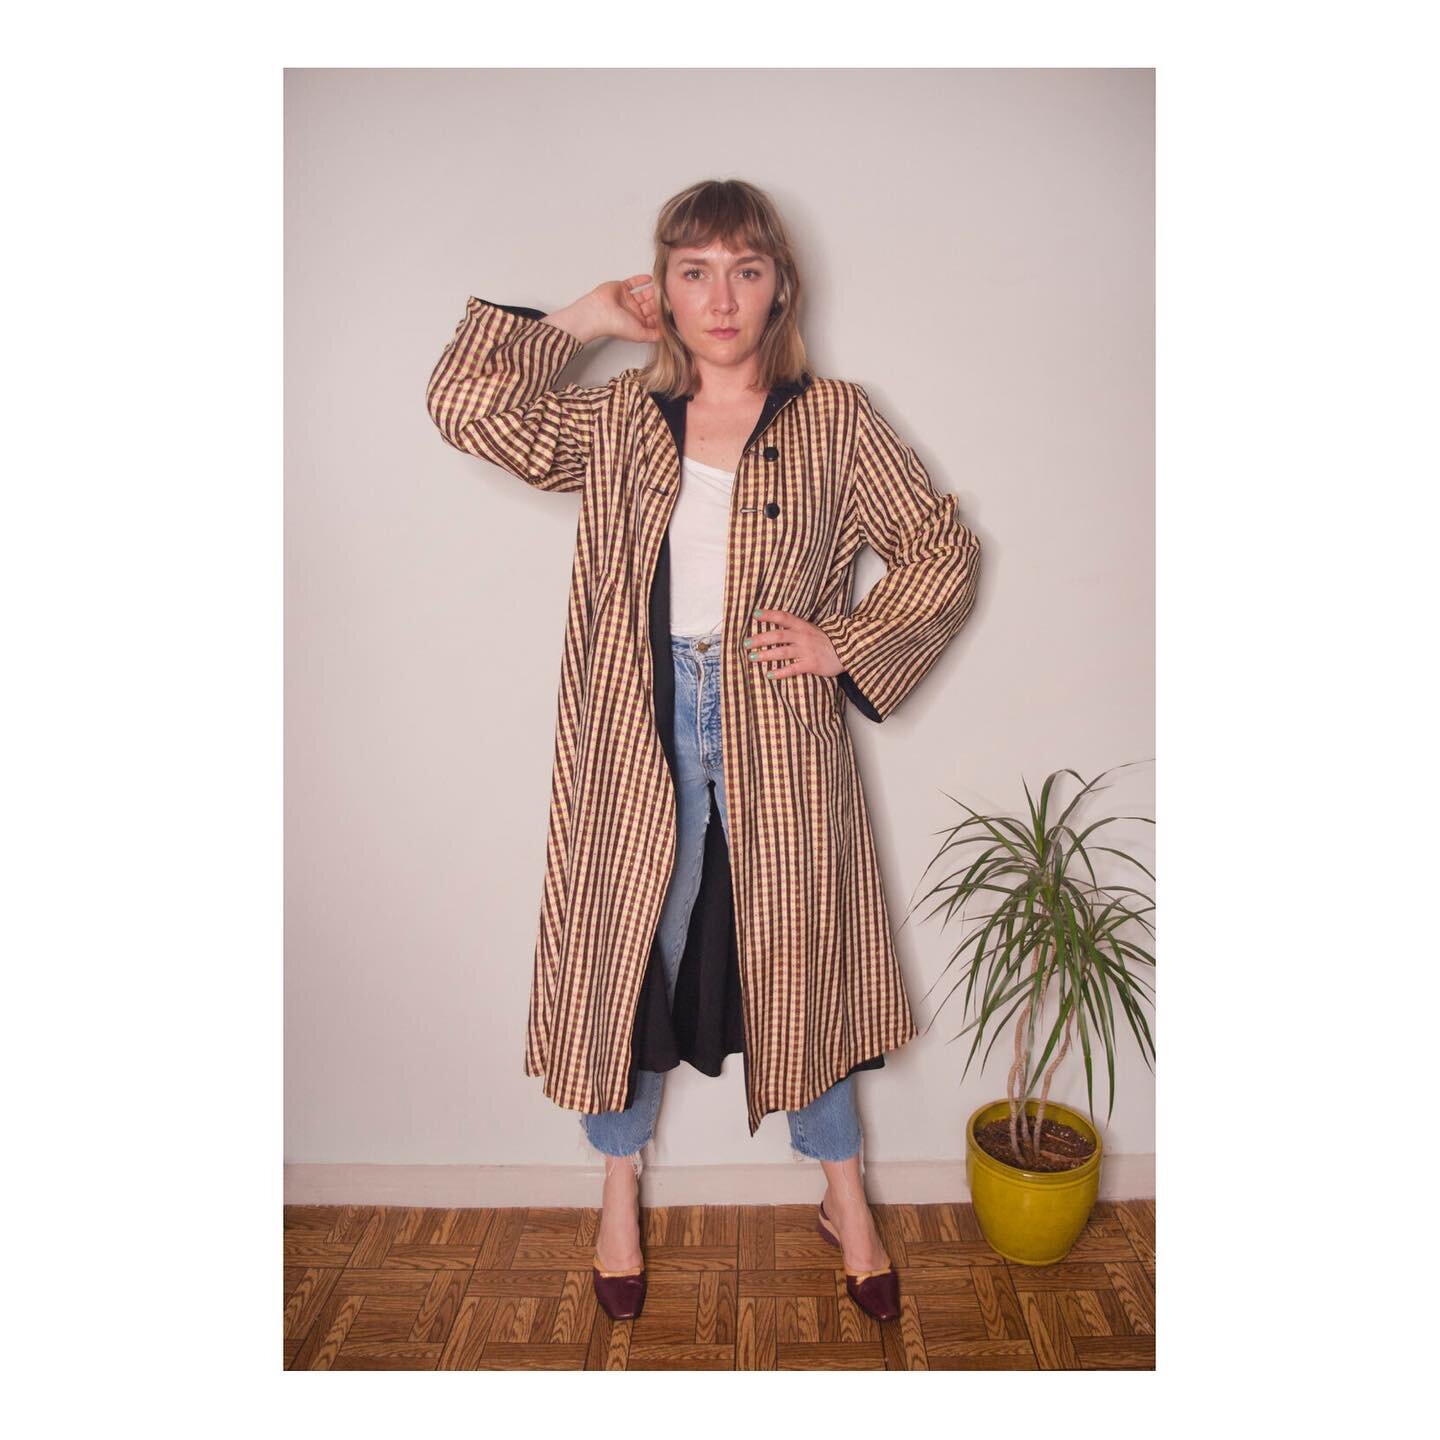 Been thinking a lot about this  1940s reversible plaid duster and how it&rsquo;s still available online 🥲
&bull;
&bull;
&bull;
&bull;
&bull;
&bull;
&bull;
&bull;

#vintage #vintagestyle #vintagefashion #vintageclothing #vintageclothes #vintage #cryi